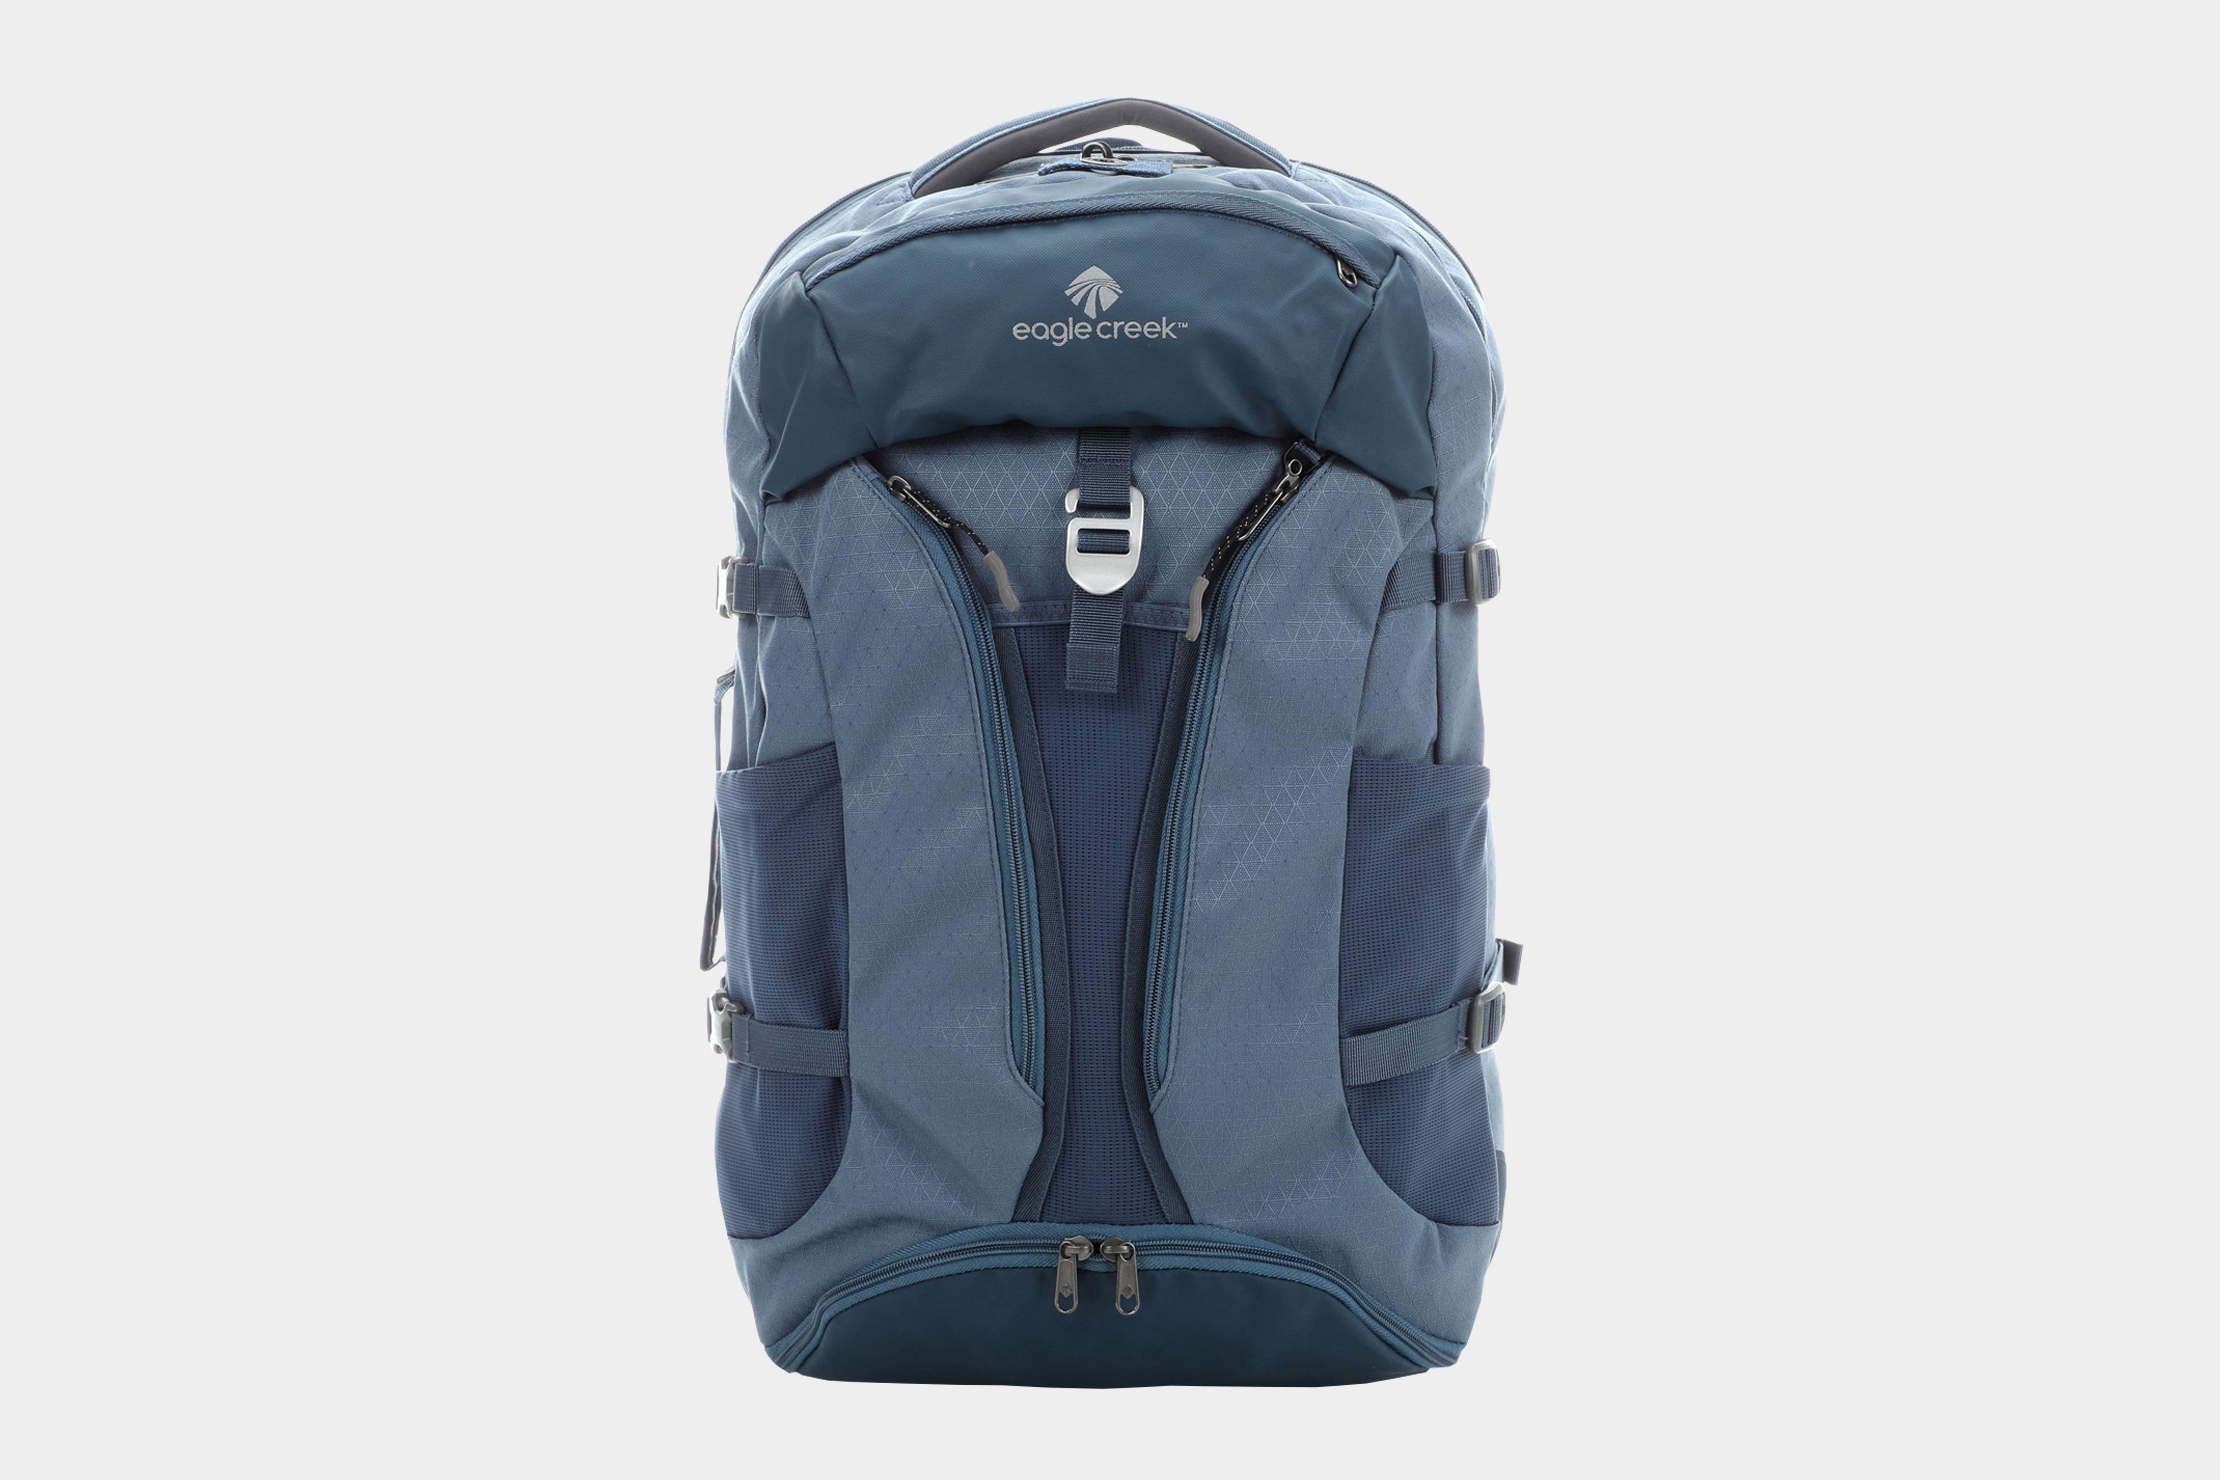 Best Travel Backpack: How To Pick In 